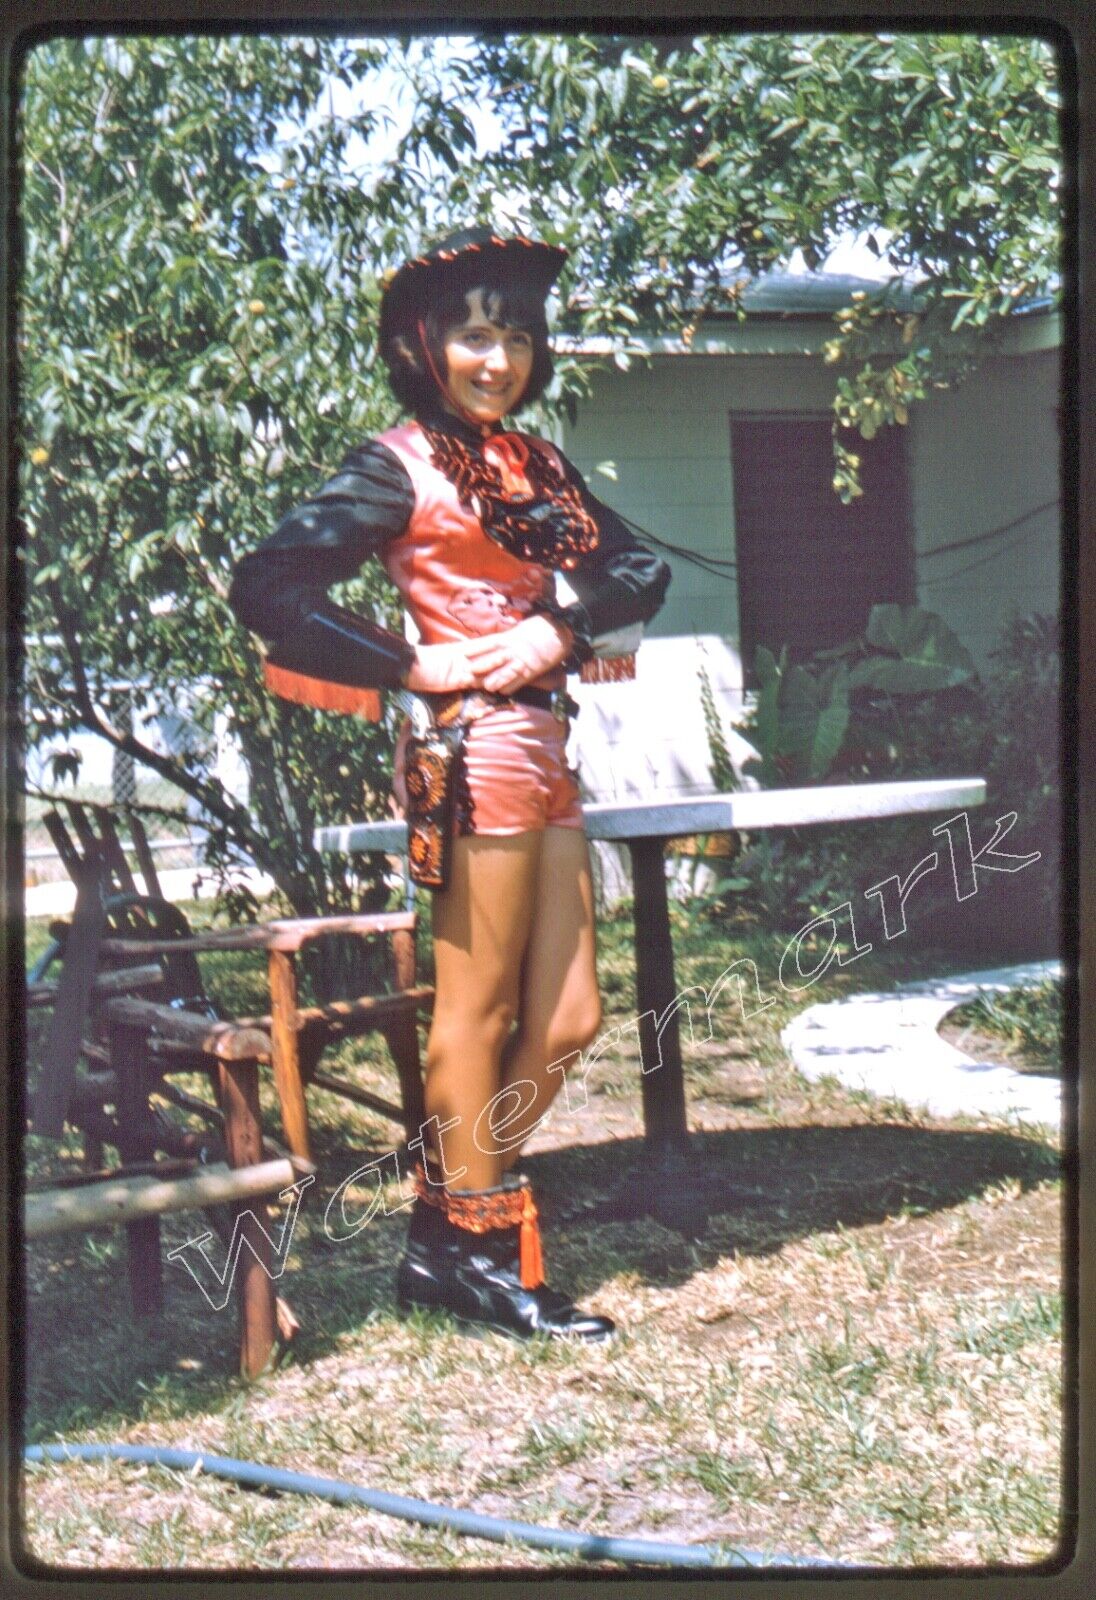 Young Lady Dressed as a Cowgirl, 35mm slide, 1967 Kodachrome